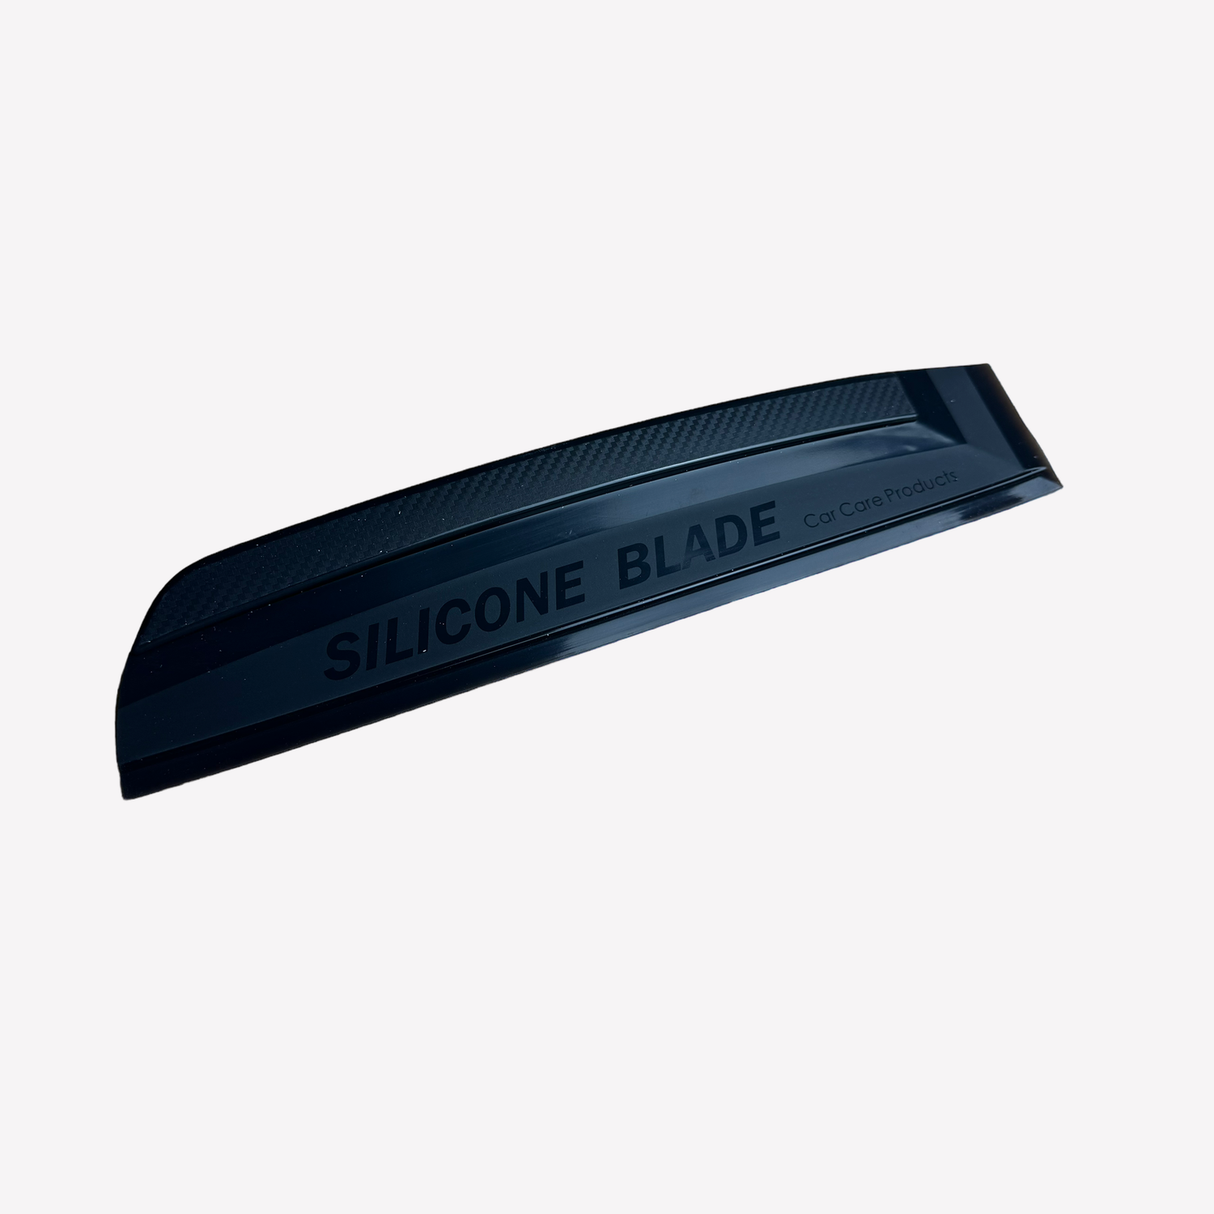 Premium Super Soft Silicone Blade Squeegee For Cars & Windows Detailing Must Have